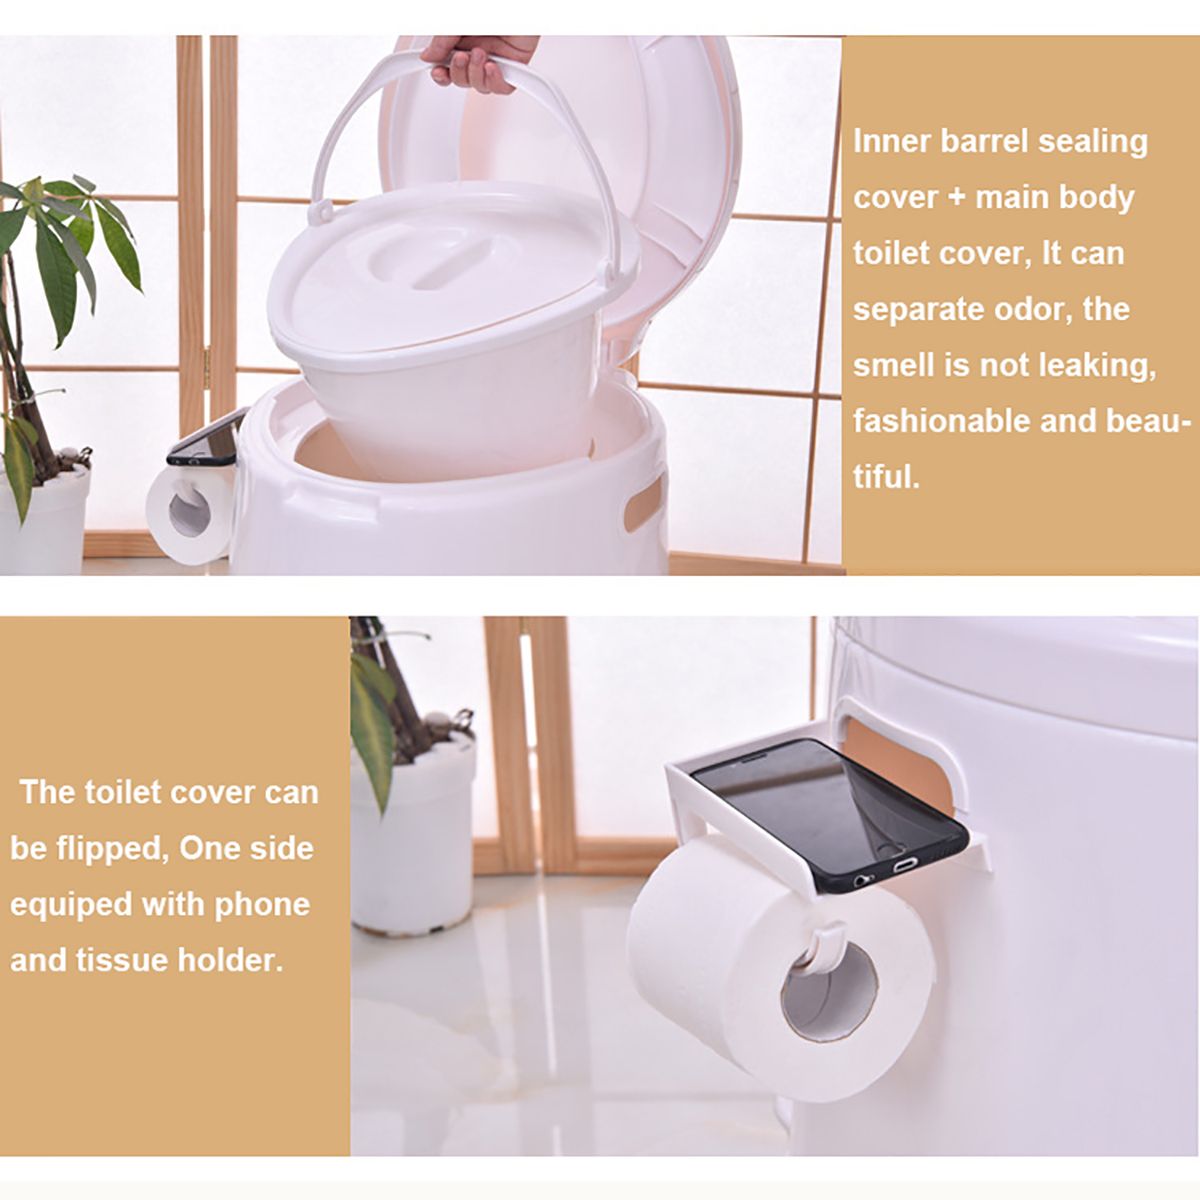 Portable-Toilet-Bowl-Extra-Strong-Durable-Support-Adult-Senior-1553352